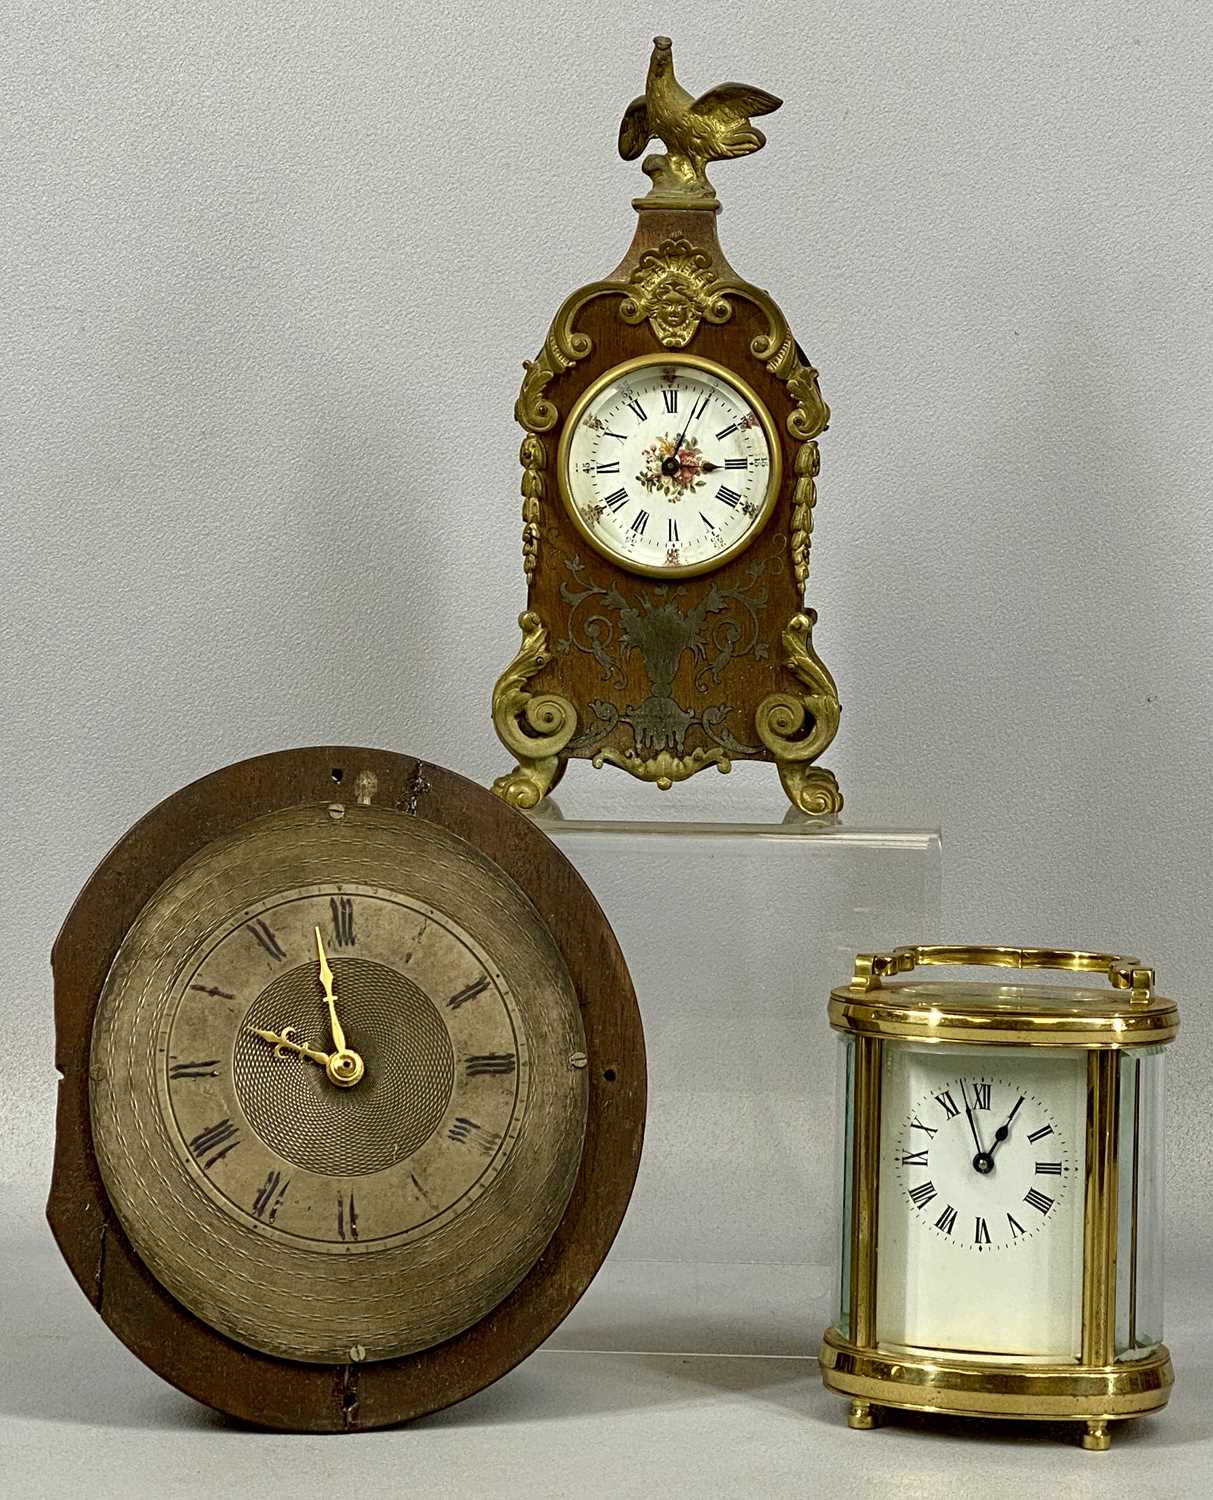 GROUP OF THREE CLOCKS, French mantel clock Rococo style with gilt metal mounts and surmounted with a